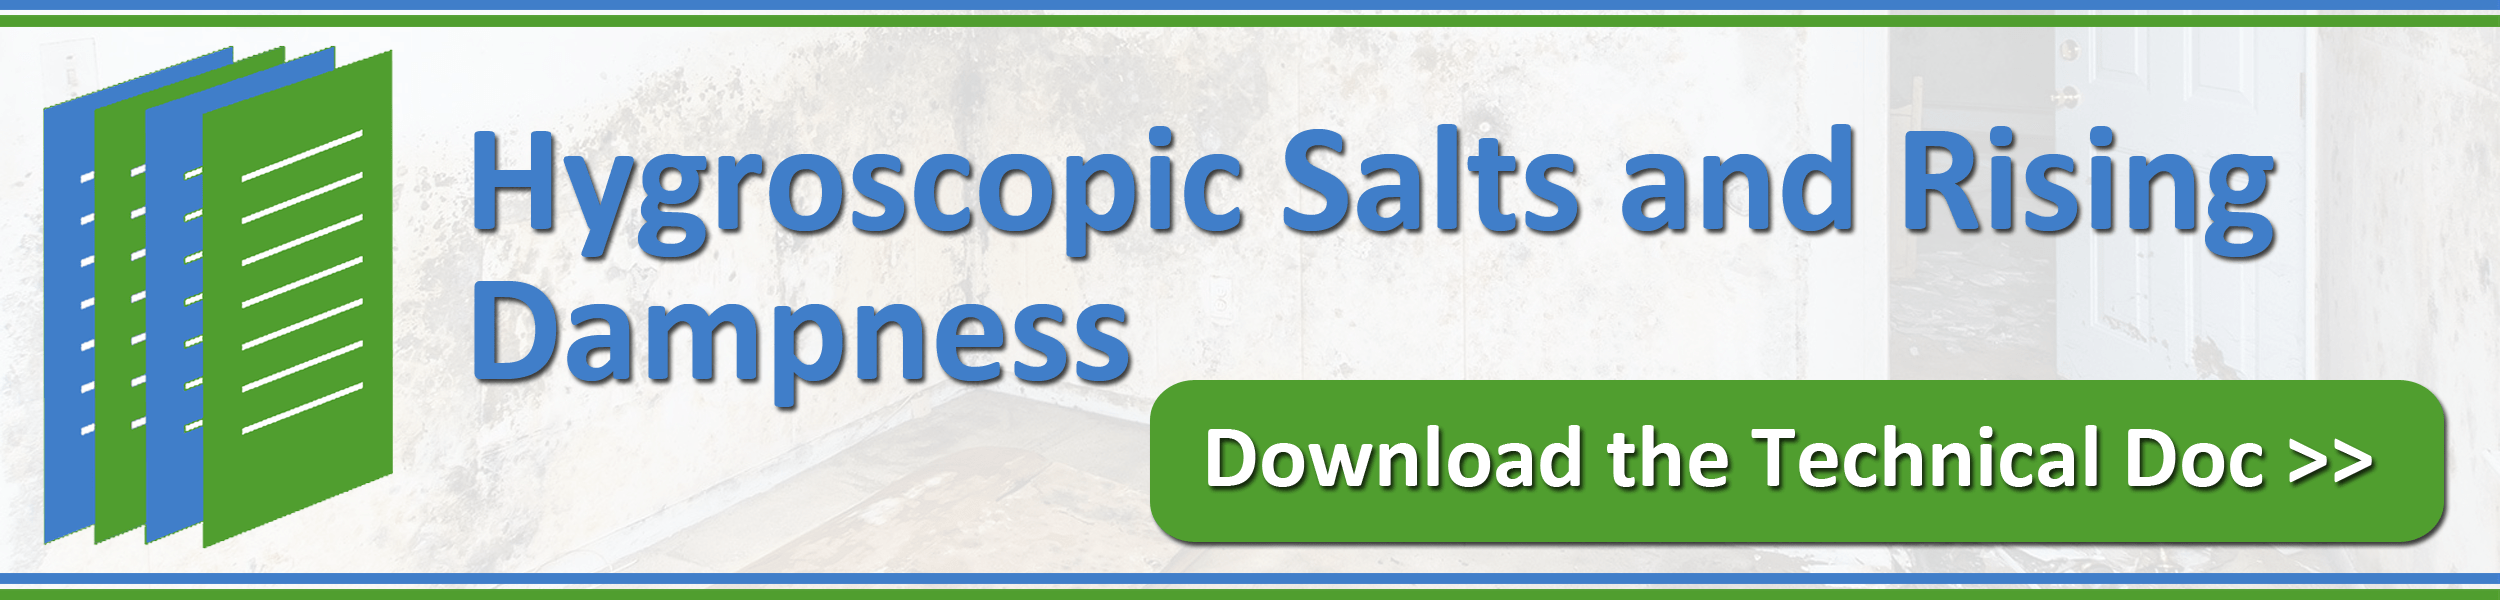 Hygroscopic-Salts-and-Rising-Dampness